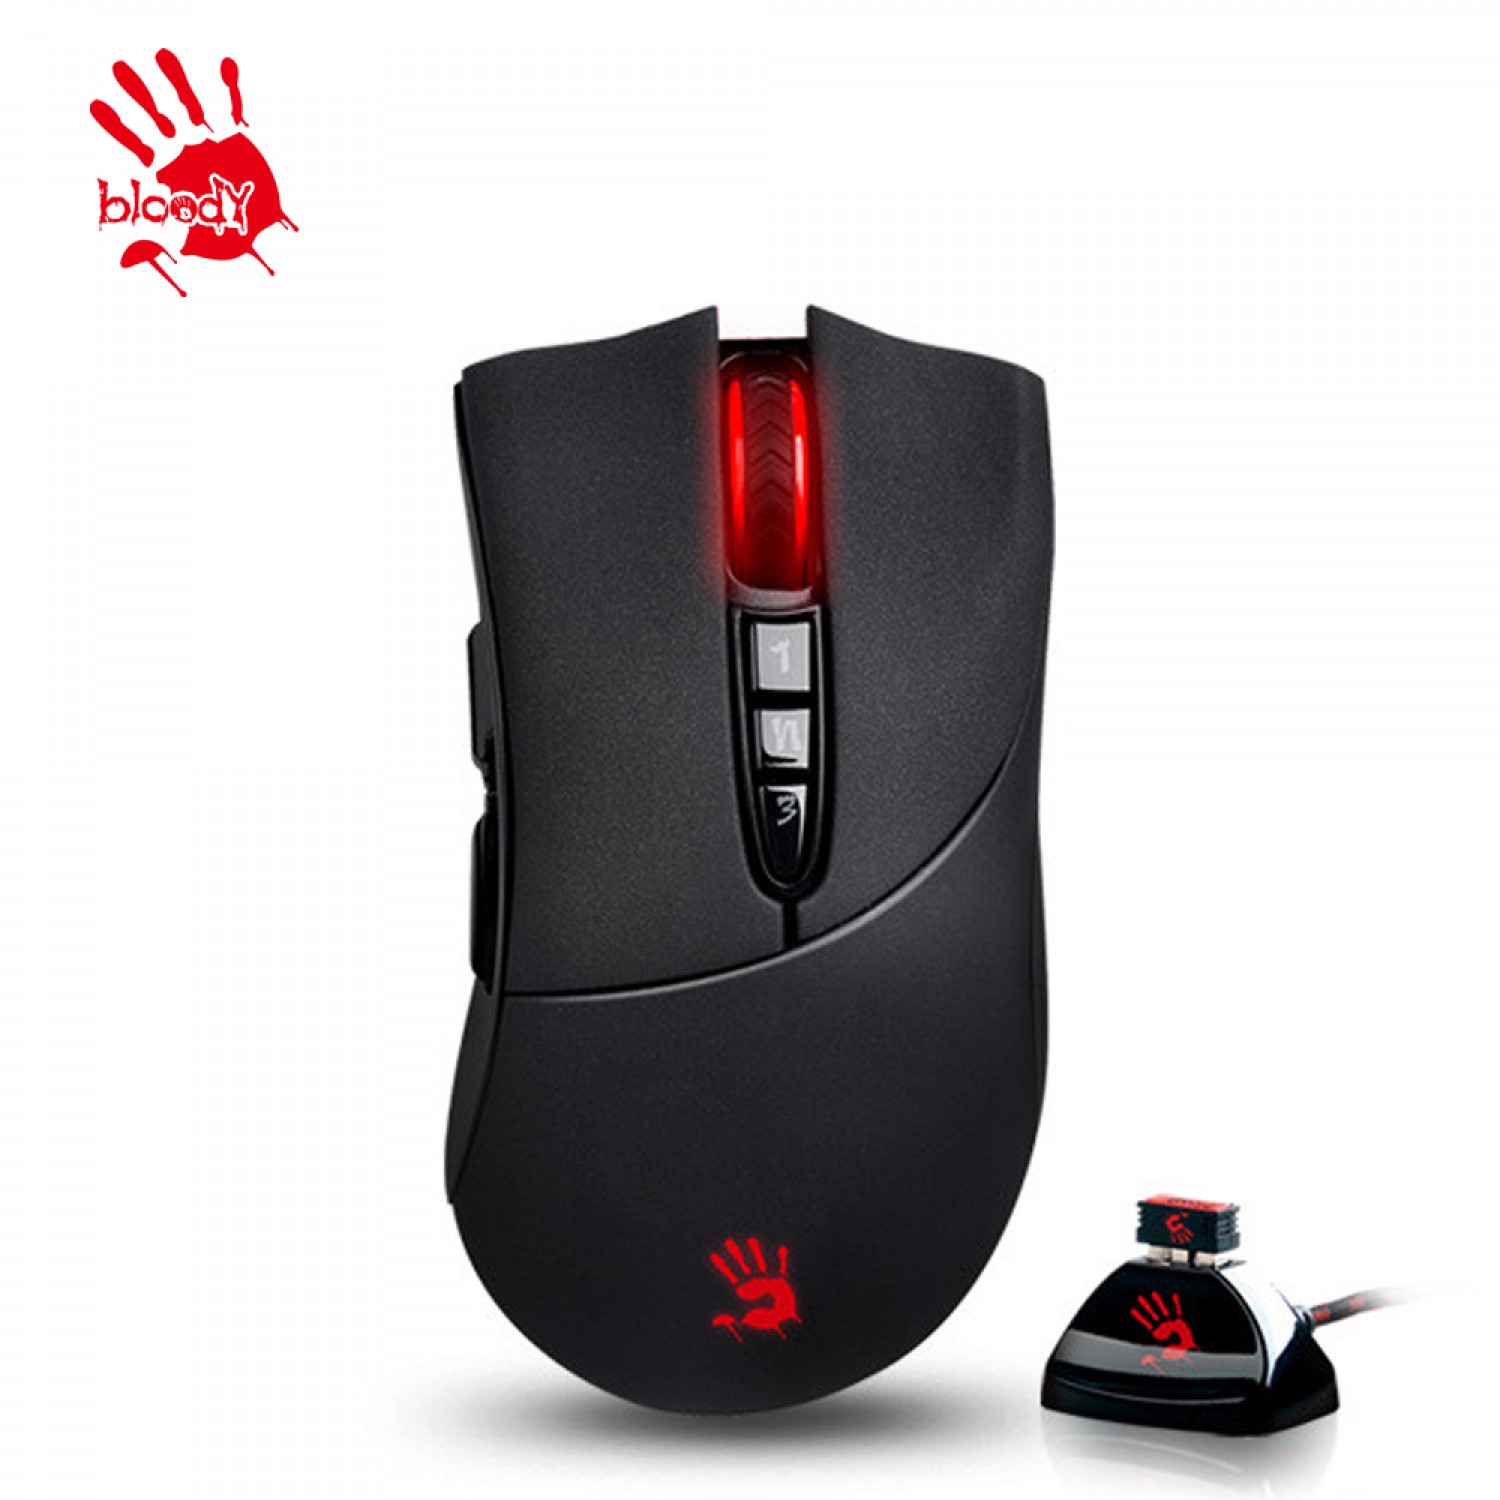 A4tech Bloody R30 Gaming Mouse